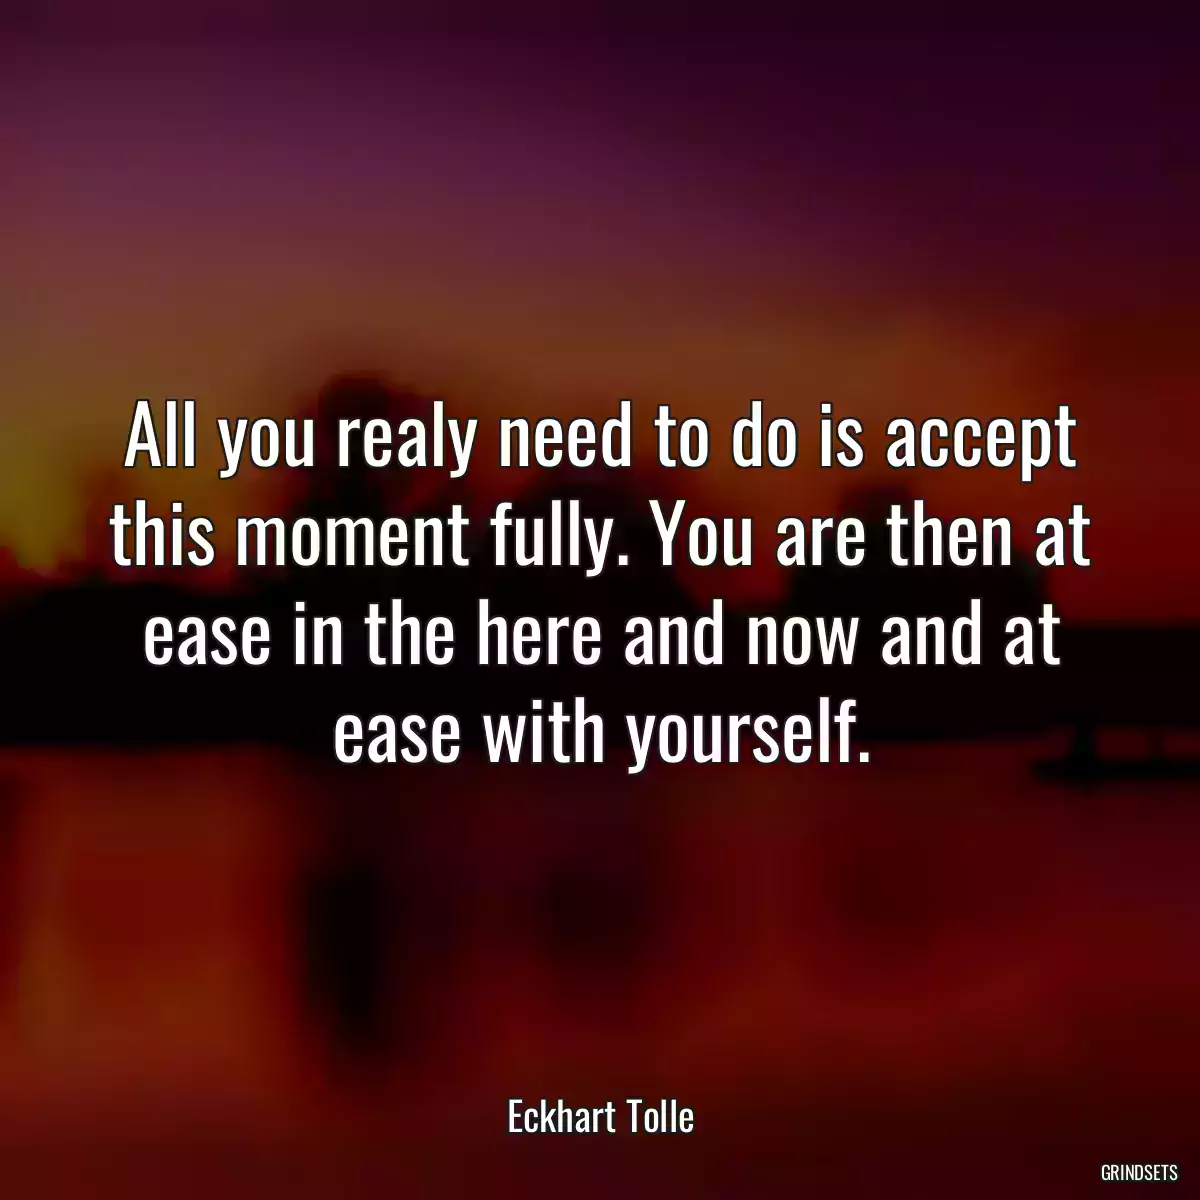 All you realy need to do is accept this moment fully. You are then at ease in the here and now and at ease with yourself.